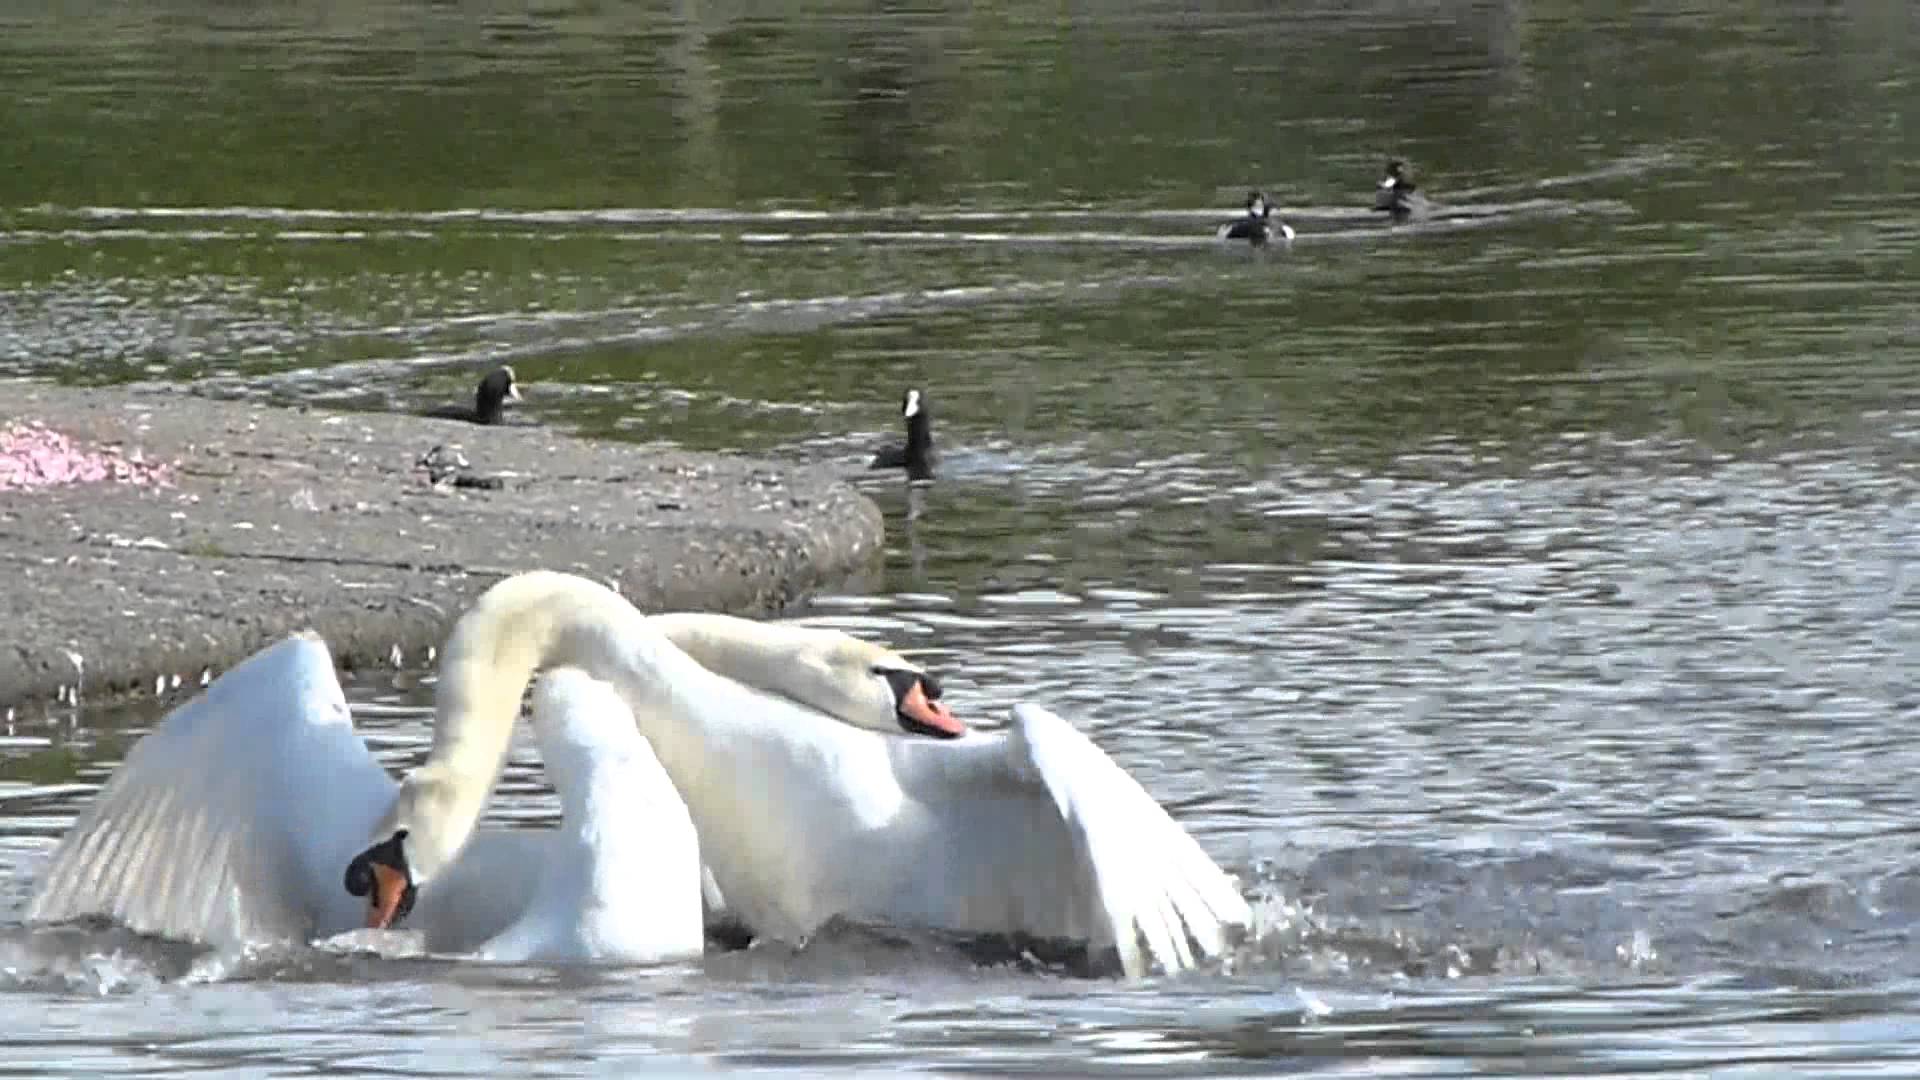 deadly swan fight - YouTube